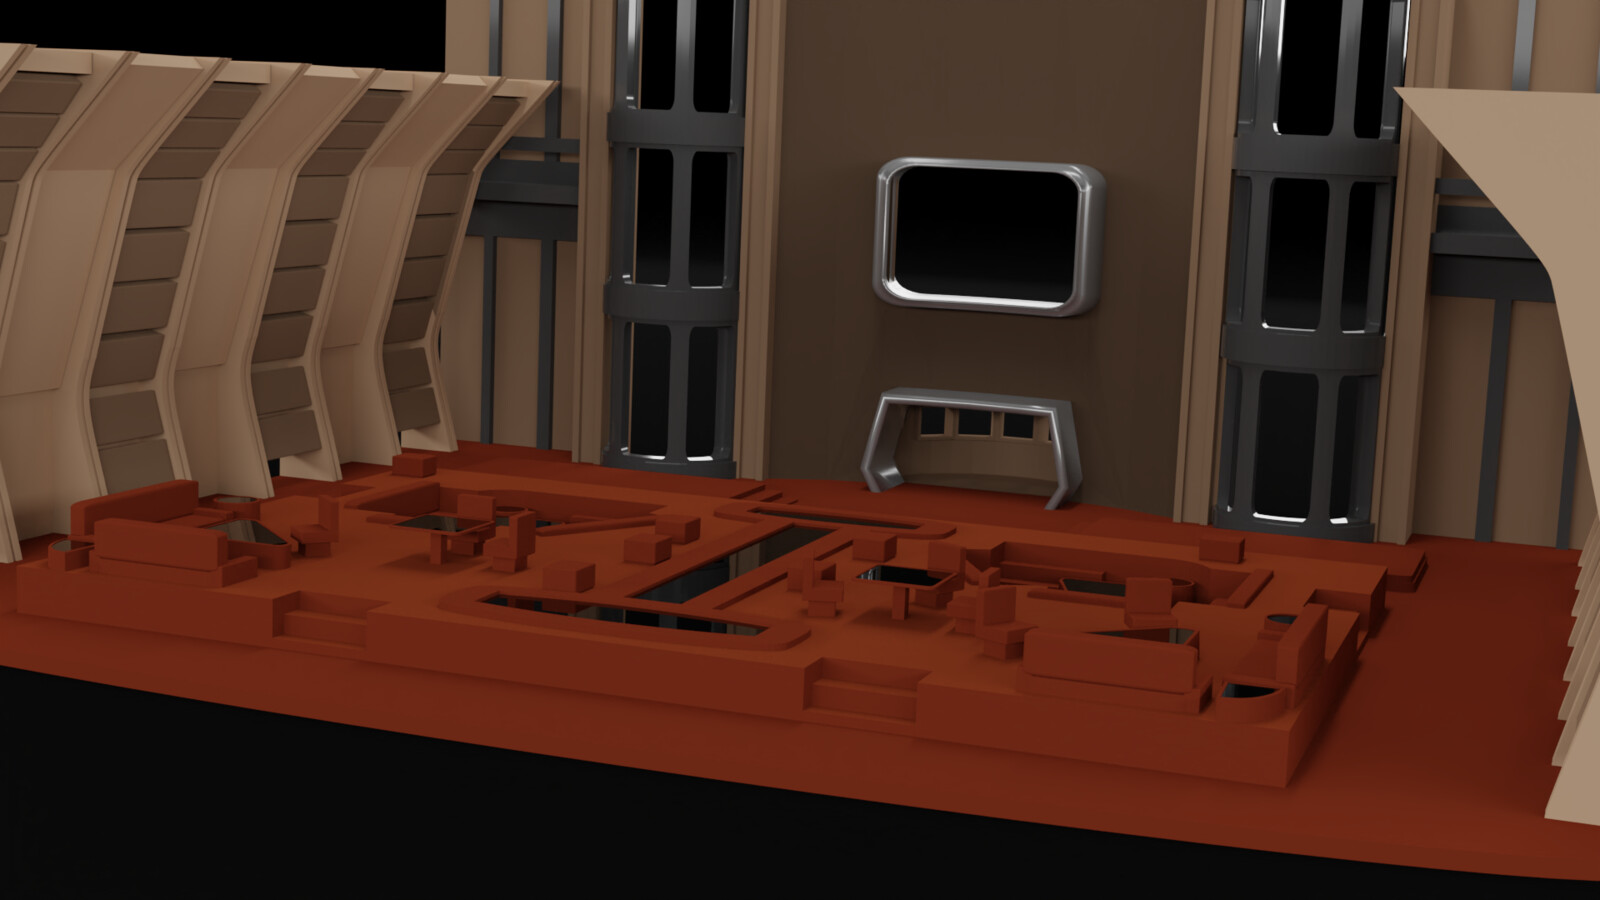 Here is a render with an early version of the back wall.